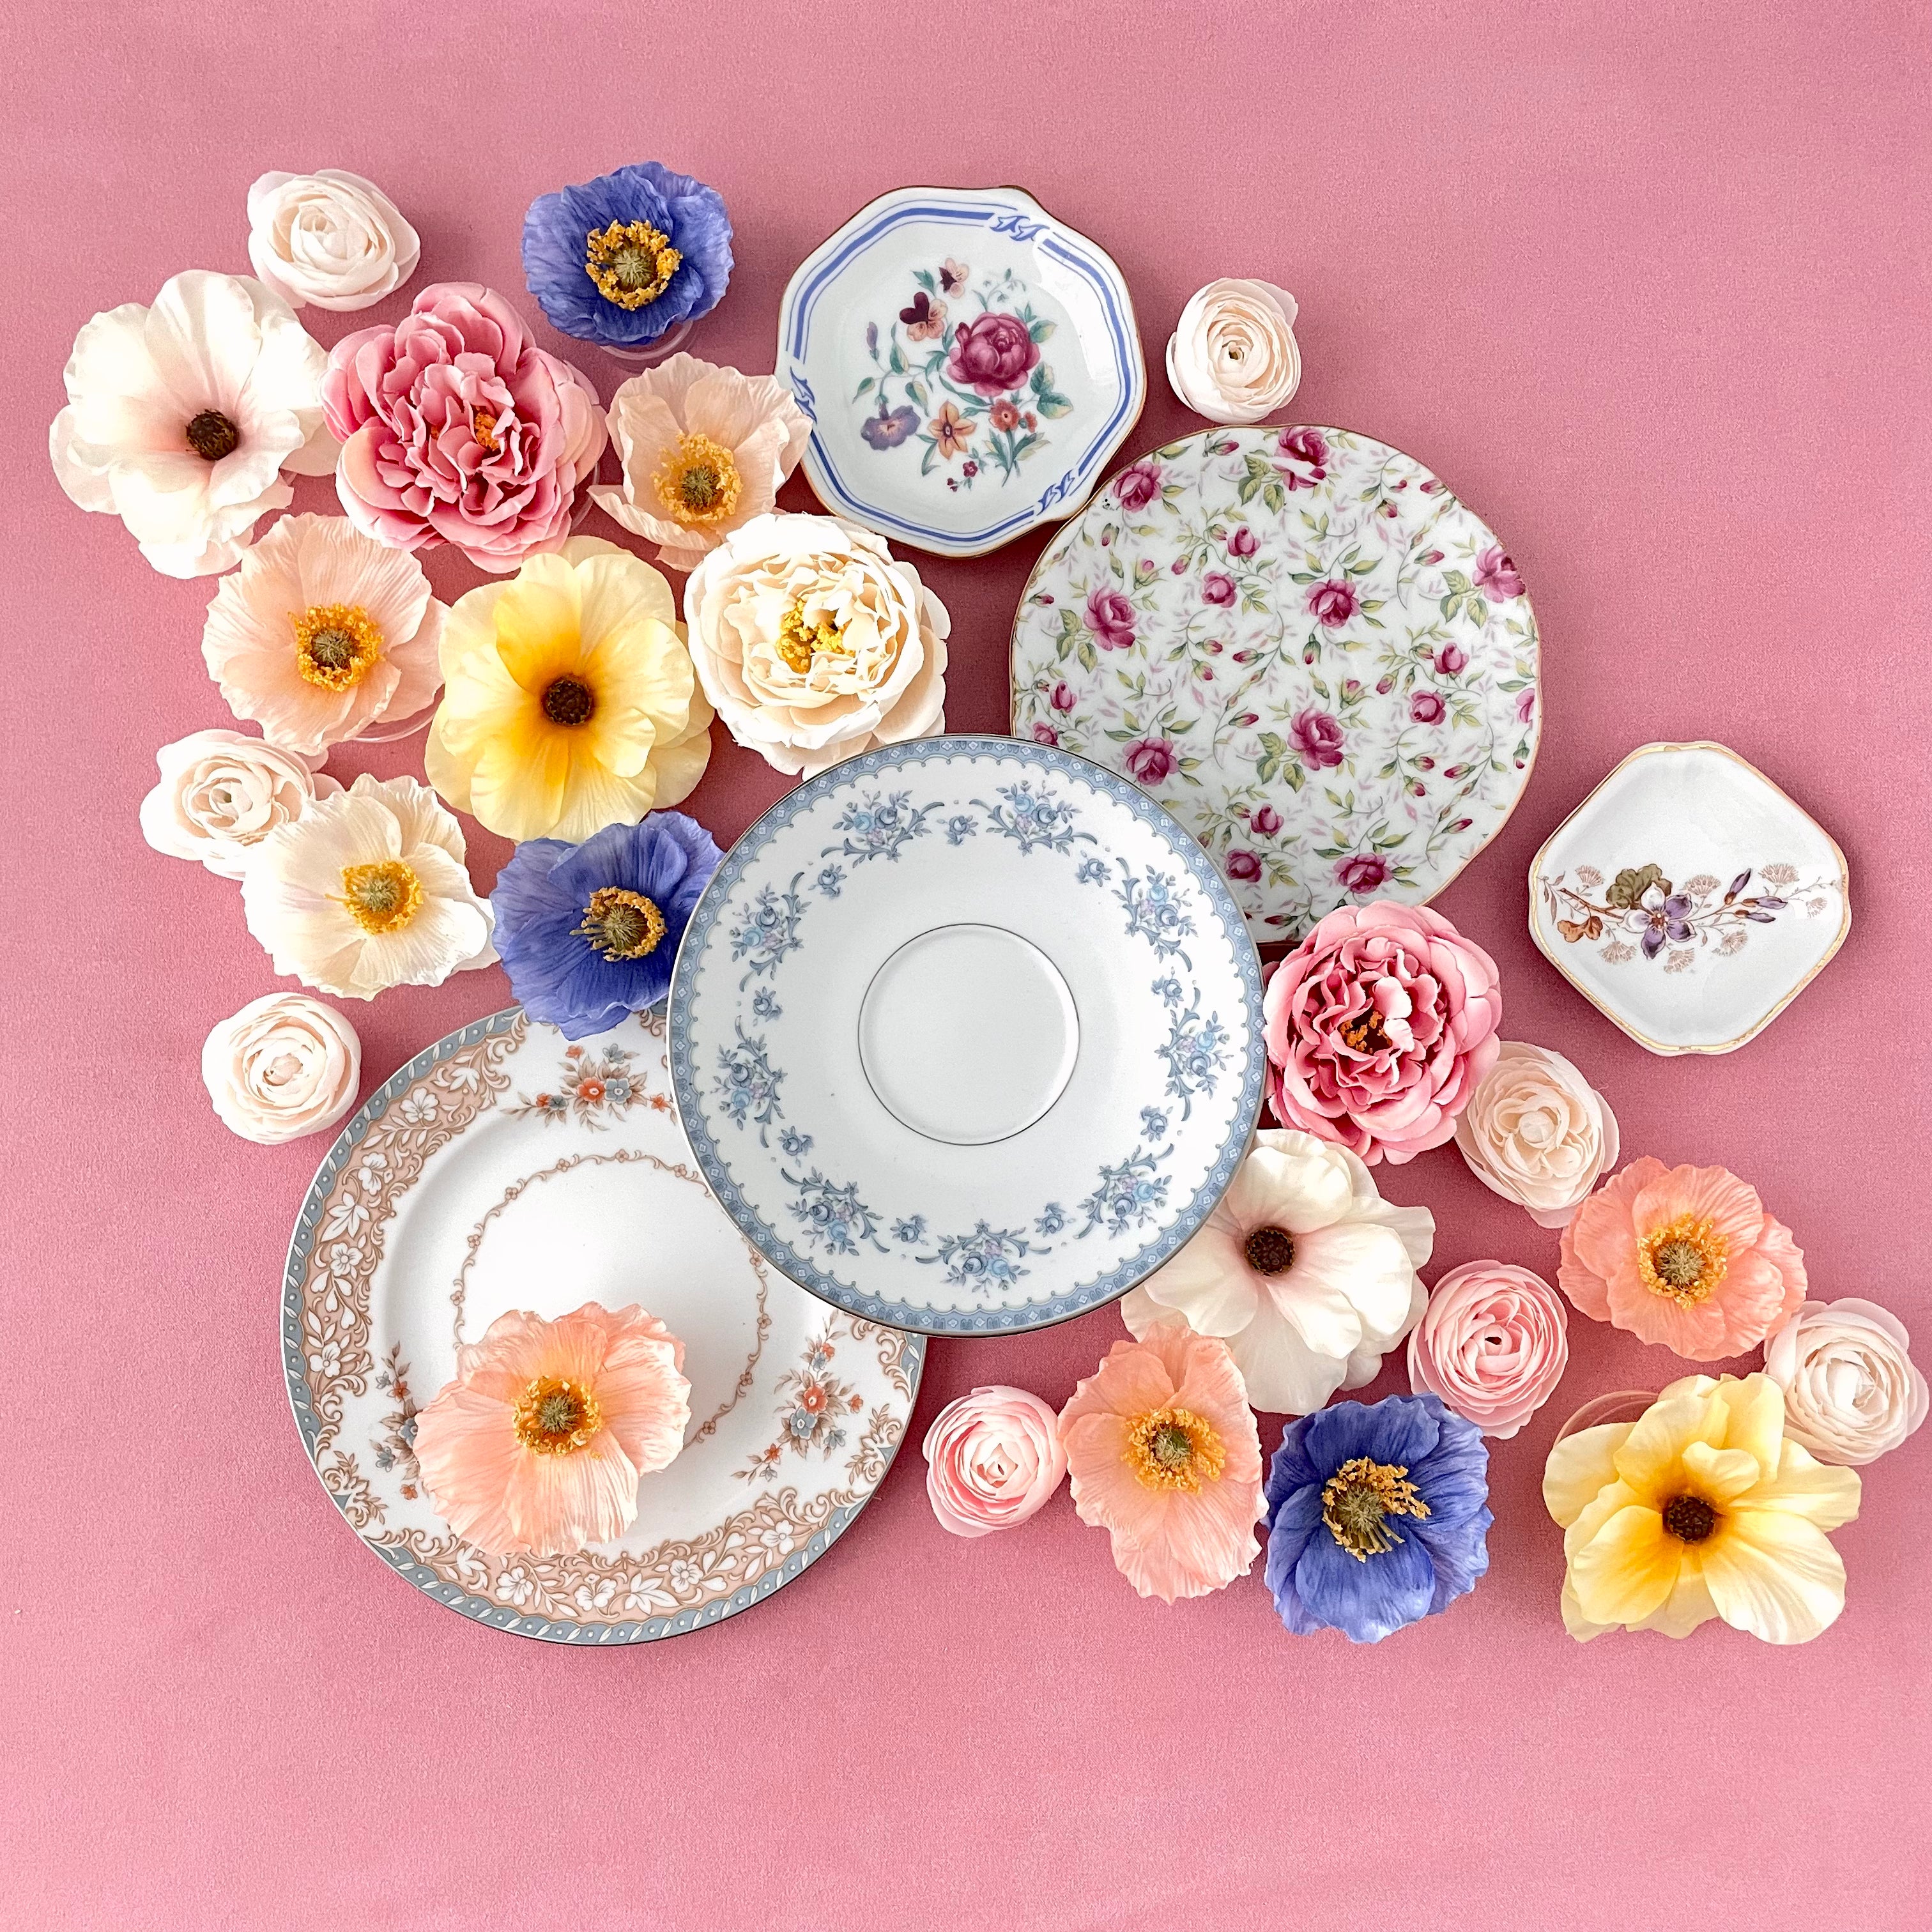 Example of floral rise kit being use on vintage dishes and florals - Wedding Flat lay props from Champagne & GRIT